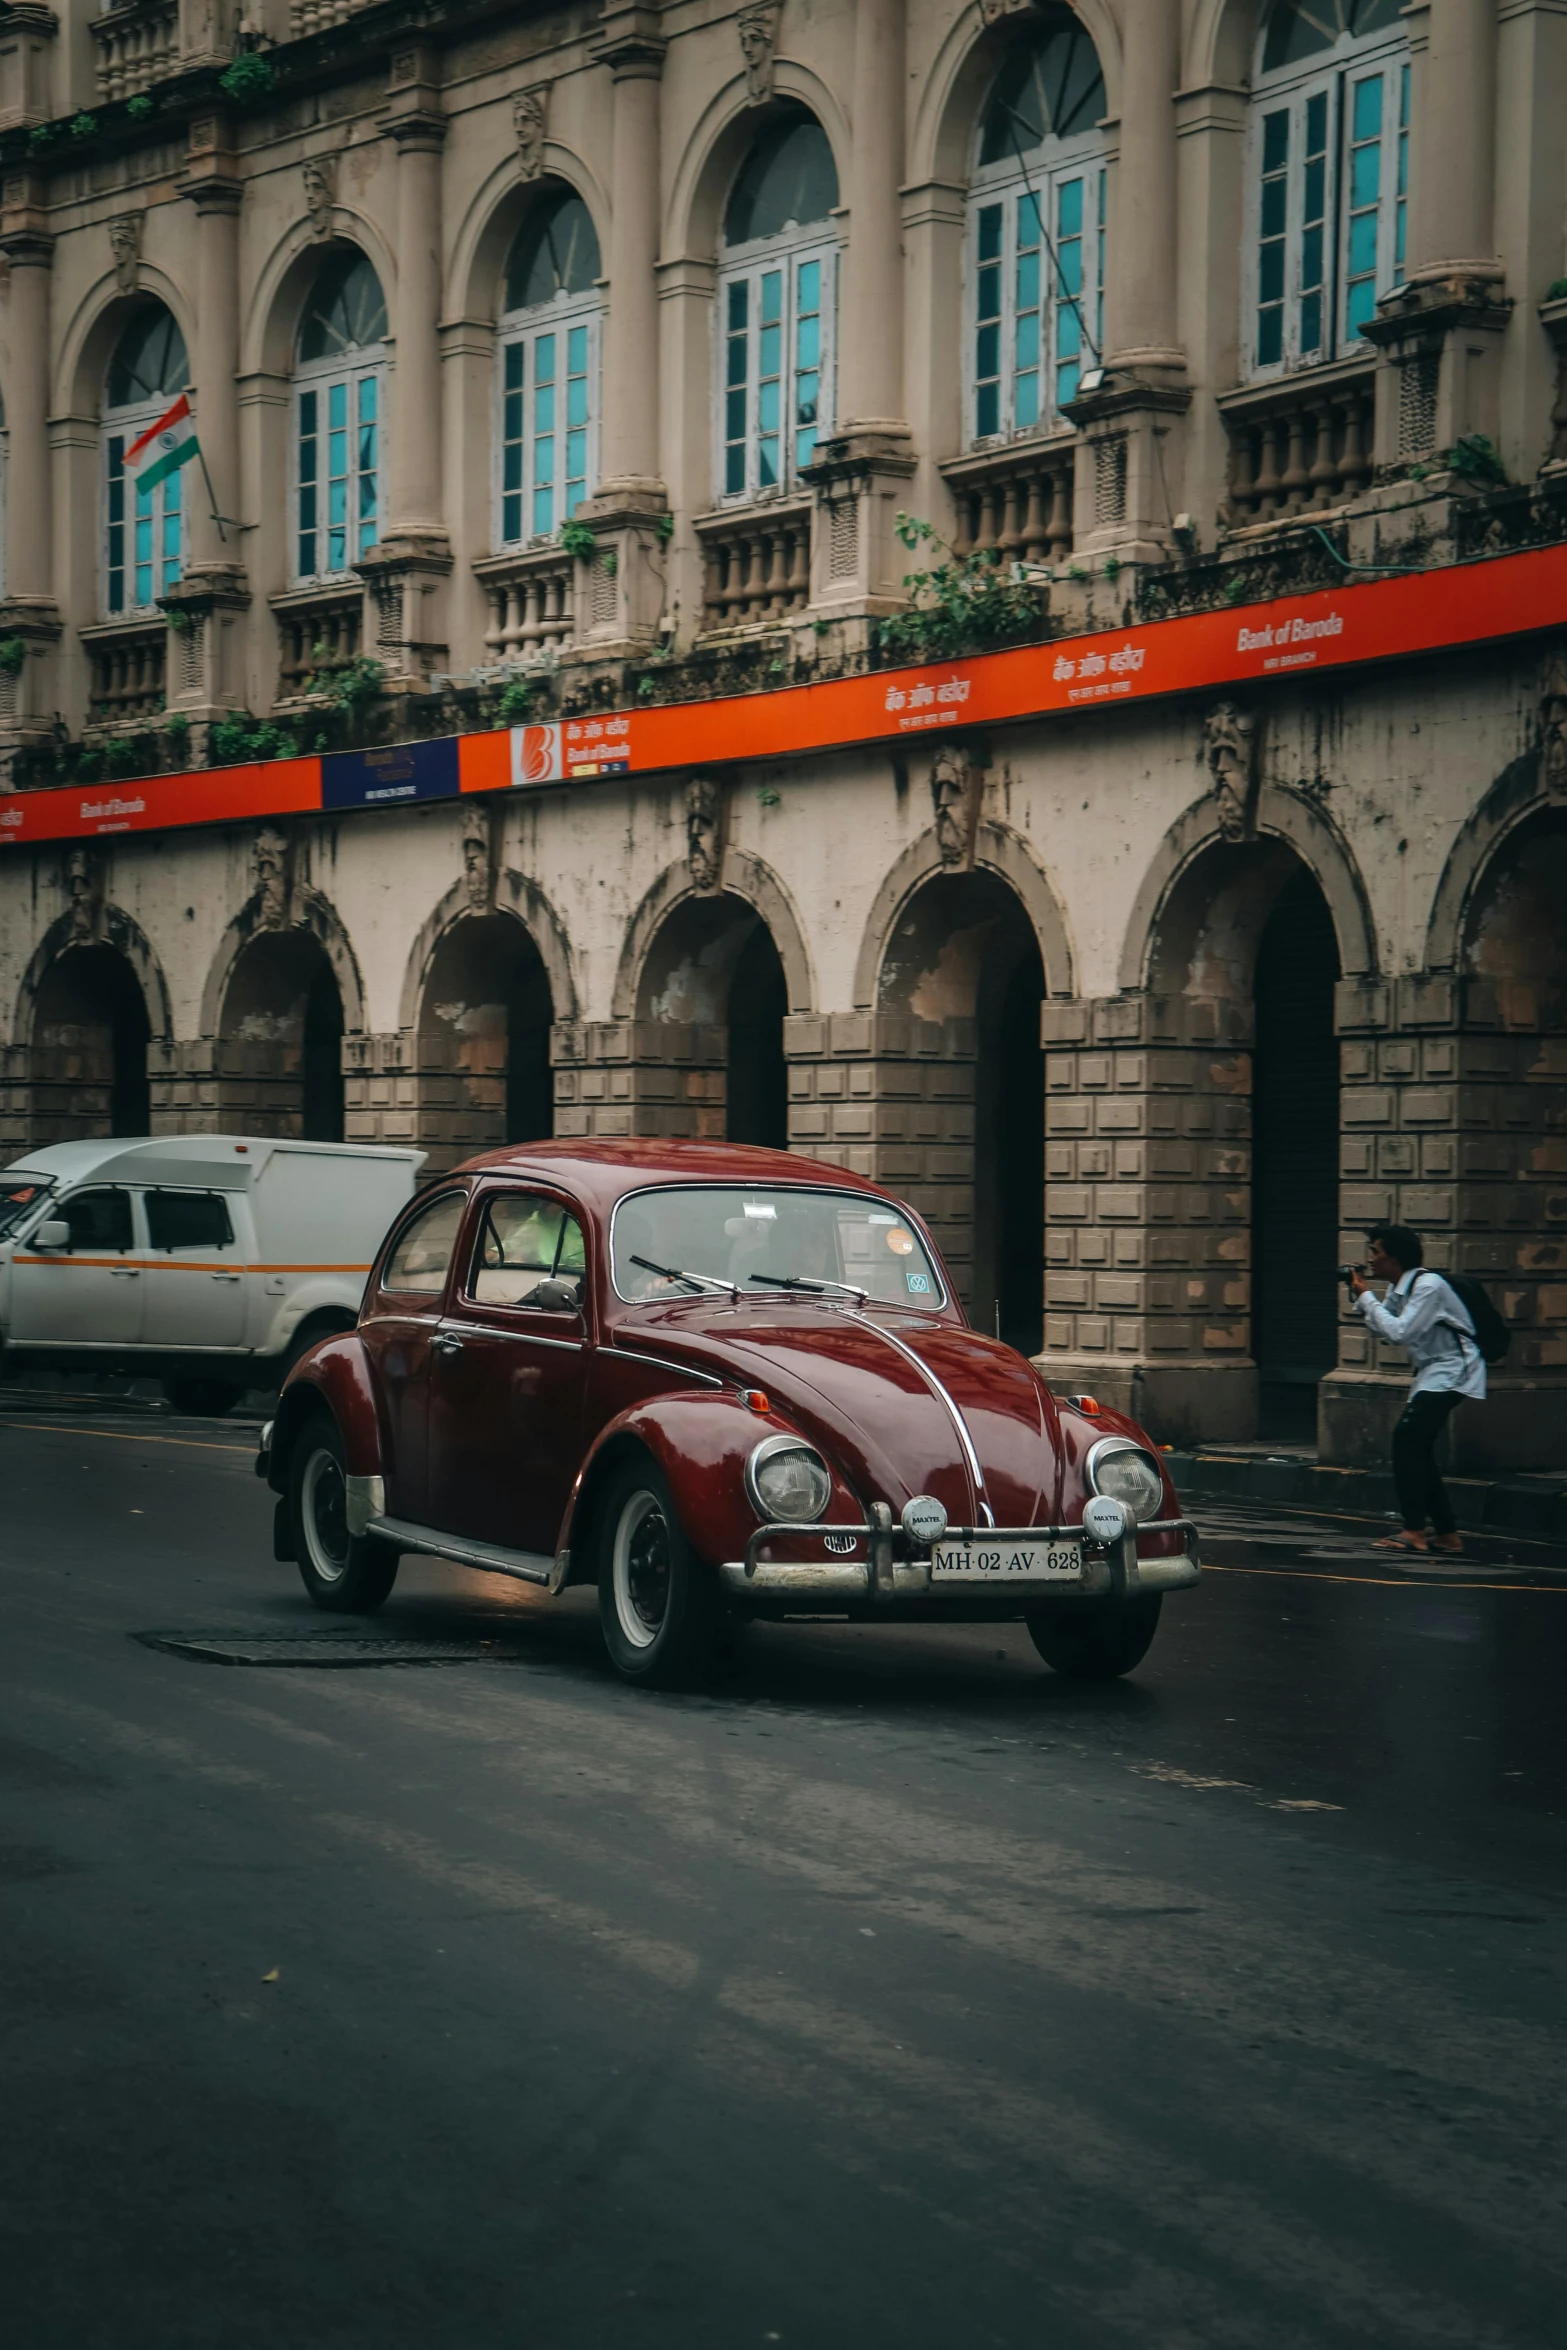 a classic car sitting in the middle of a city street